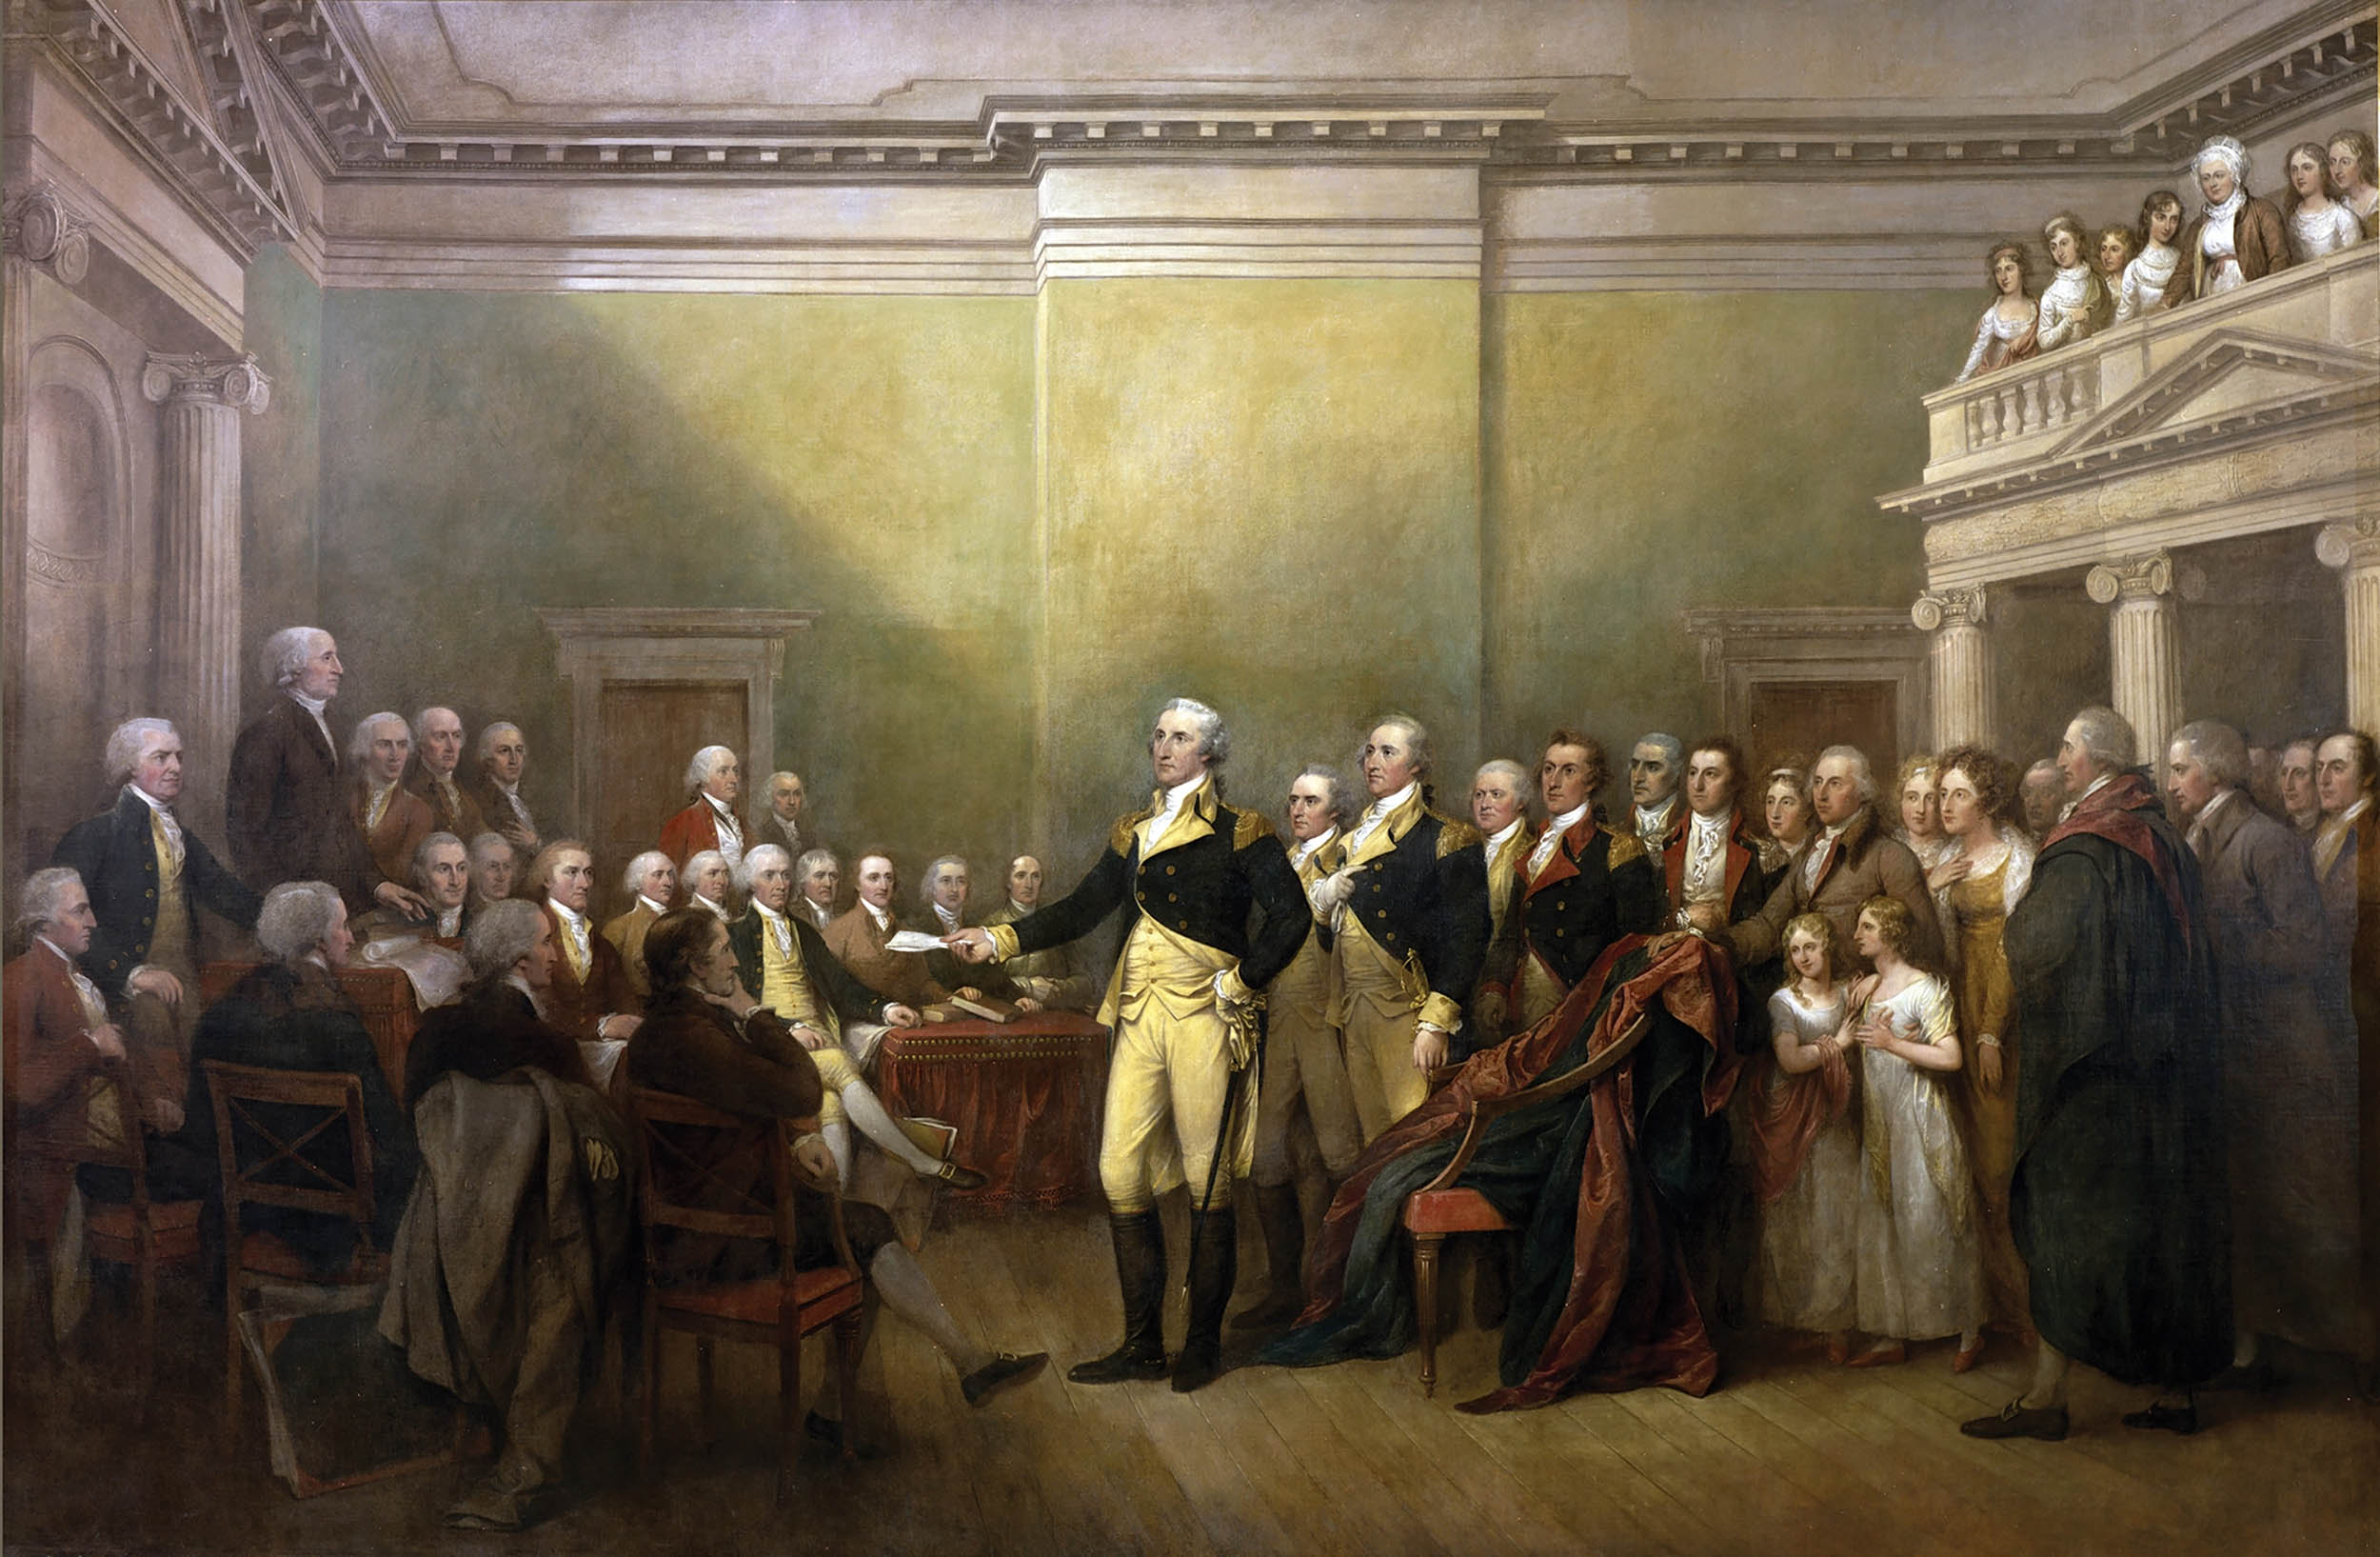 General George Washington Resigning His Commission, by John Trumbull, 1817–1824, oil on canvas, U.S. Capitol rotunda (Architect of the Capitol)